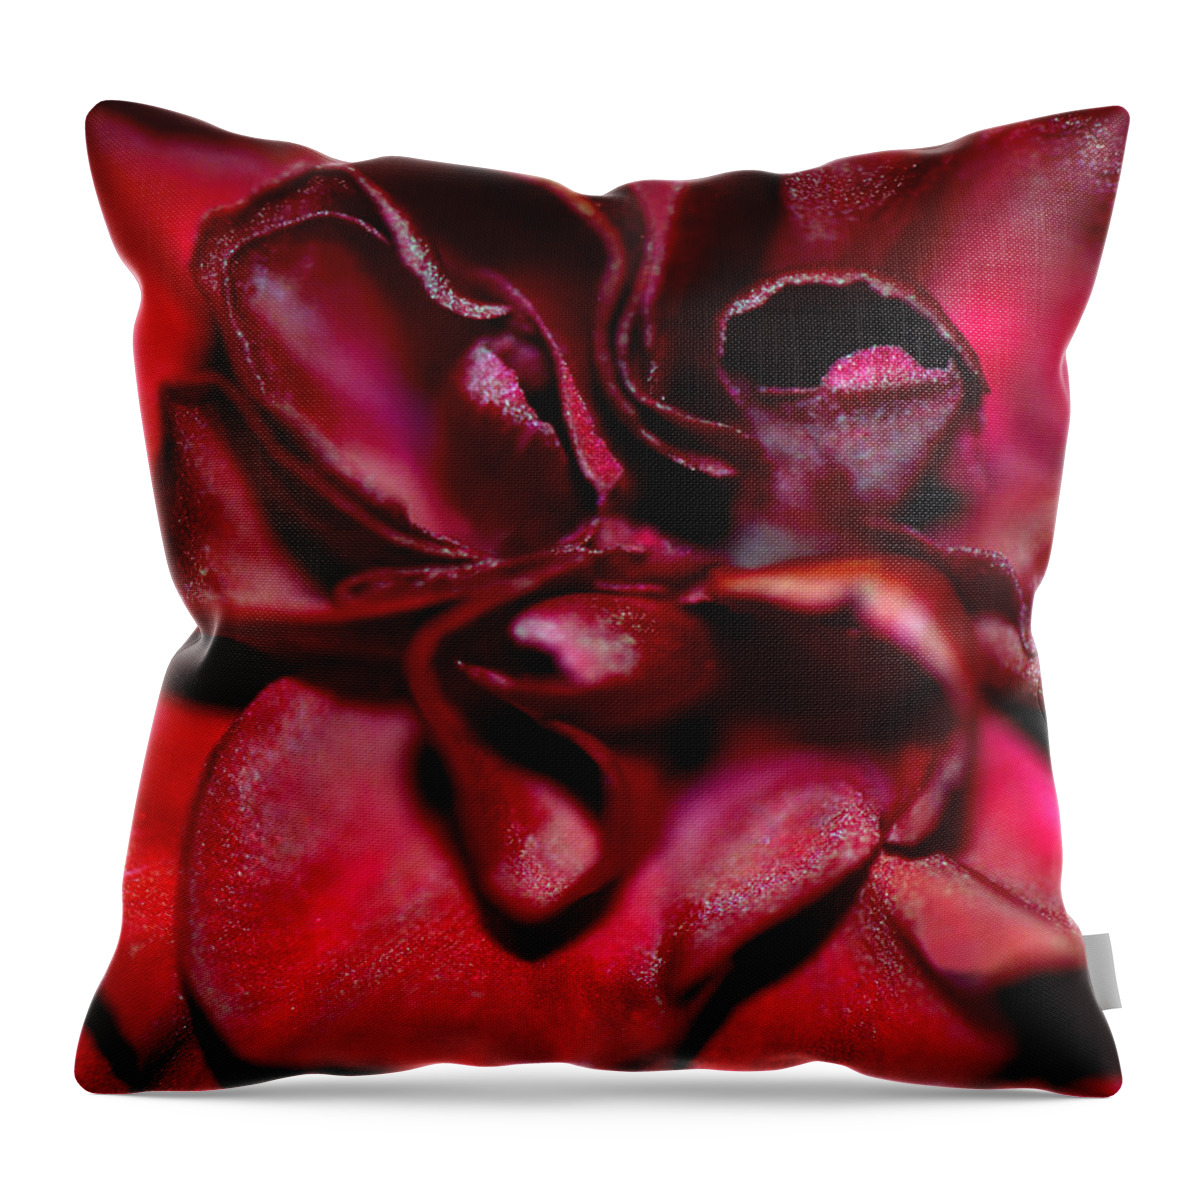 Carnation Throw Pillow featuring the photograph Red Carnation With Heart by Sandi OReilly